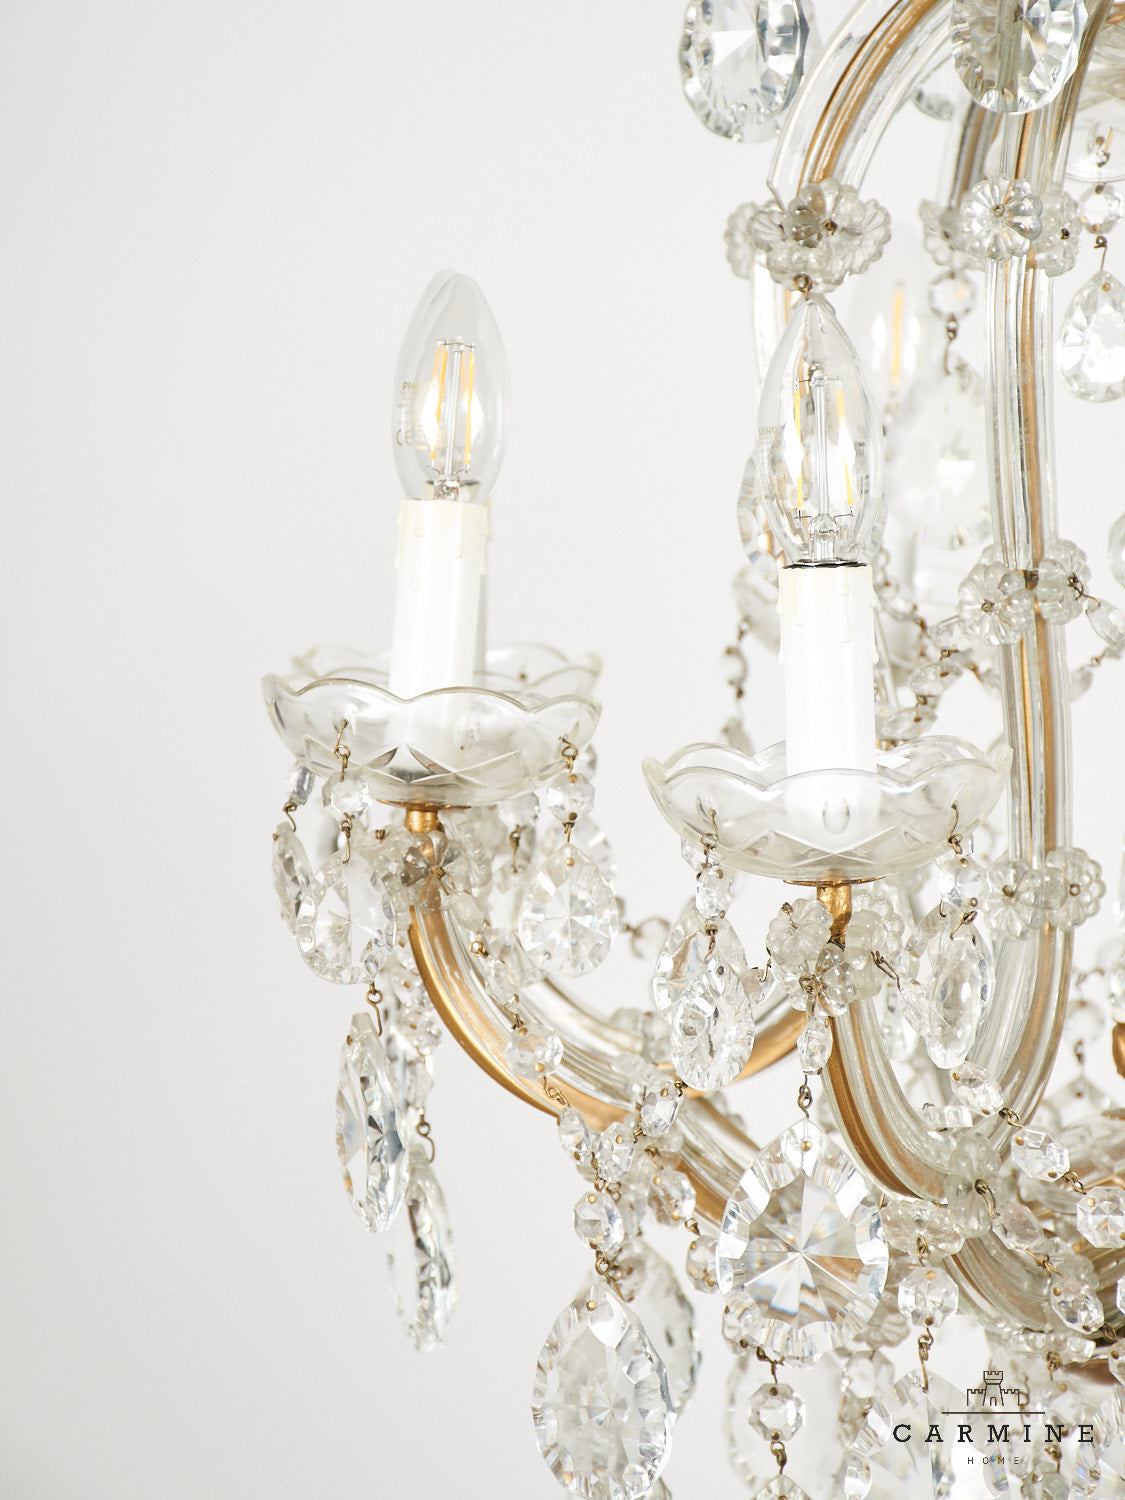 8-flame chandelier "Maria Theresia"